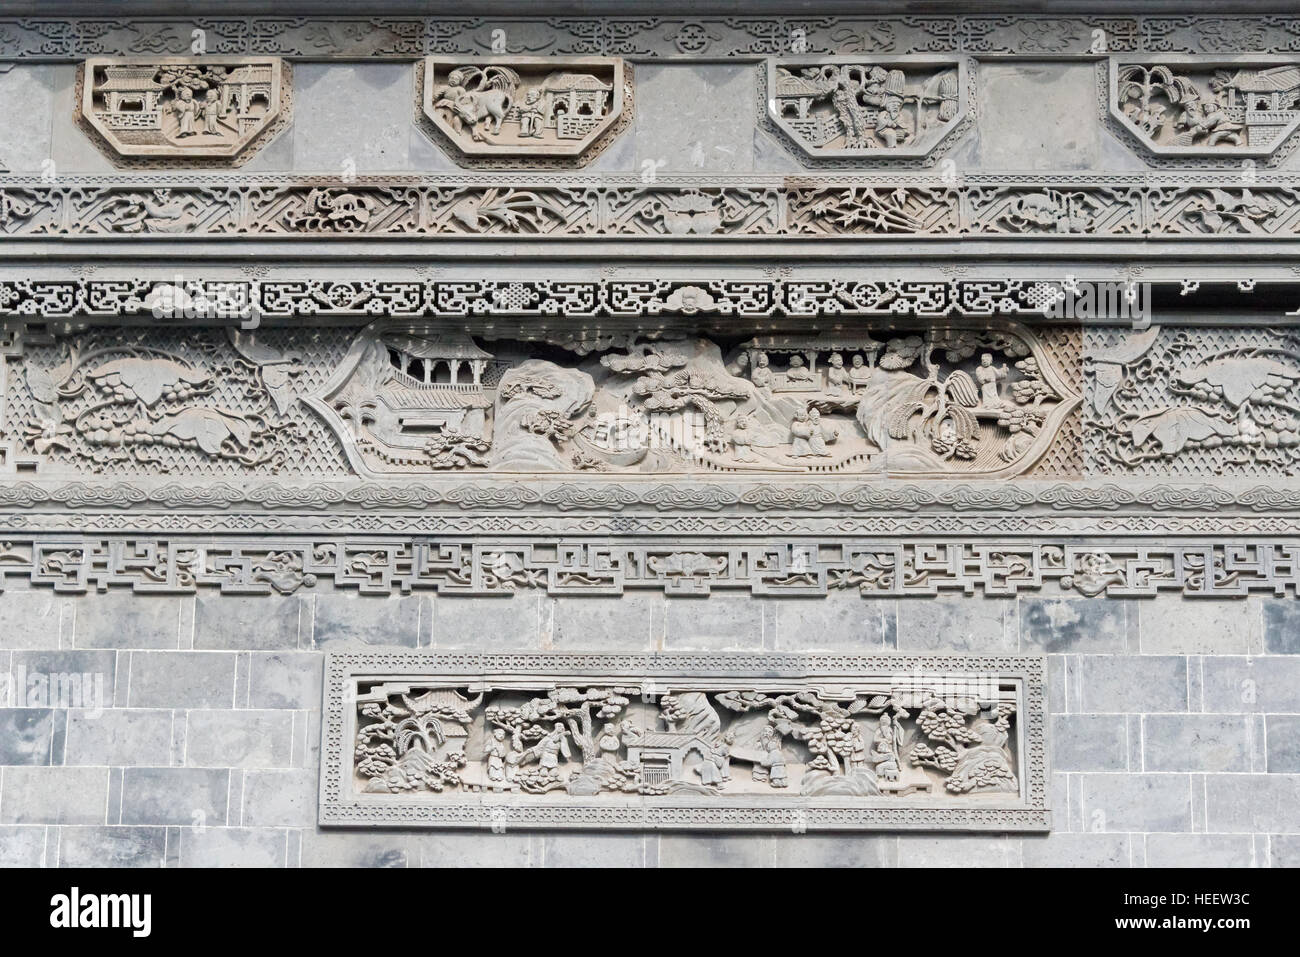 Stone carving on traditional house, Taierzhuang Ancient Town, Shandong Province, China Stock Photo